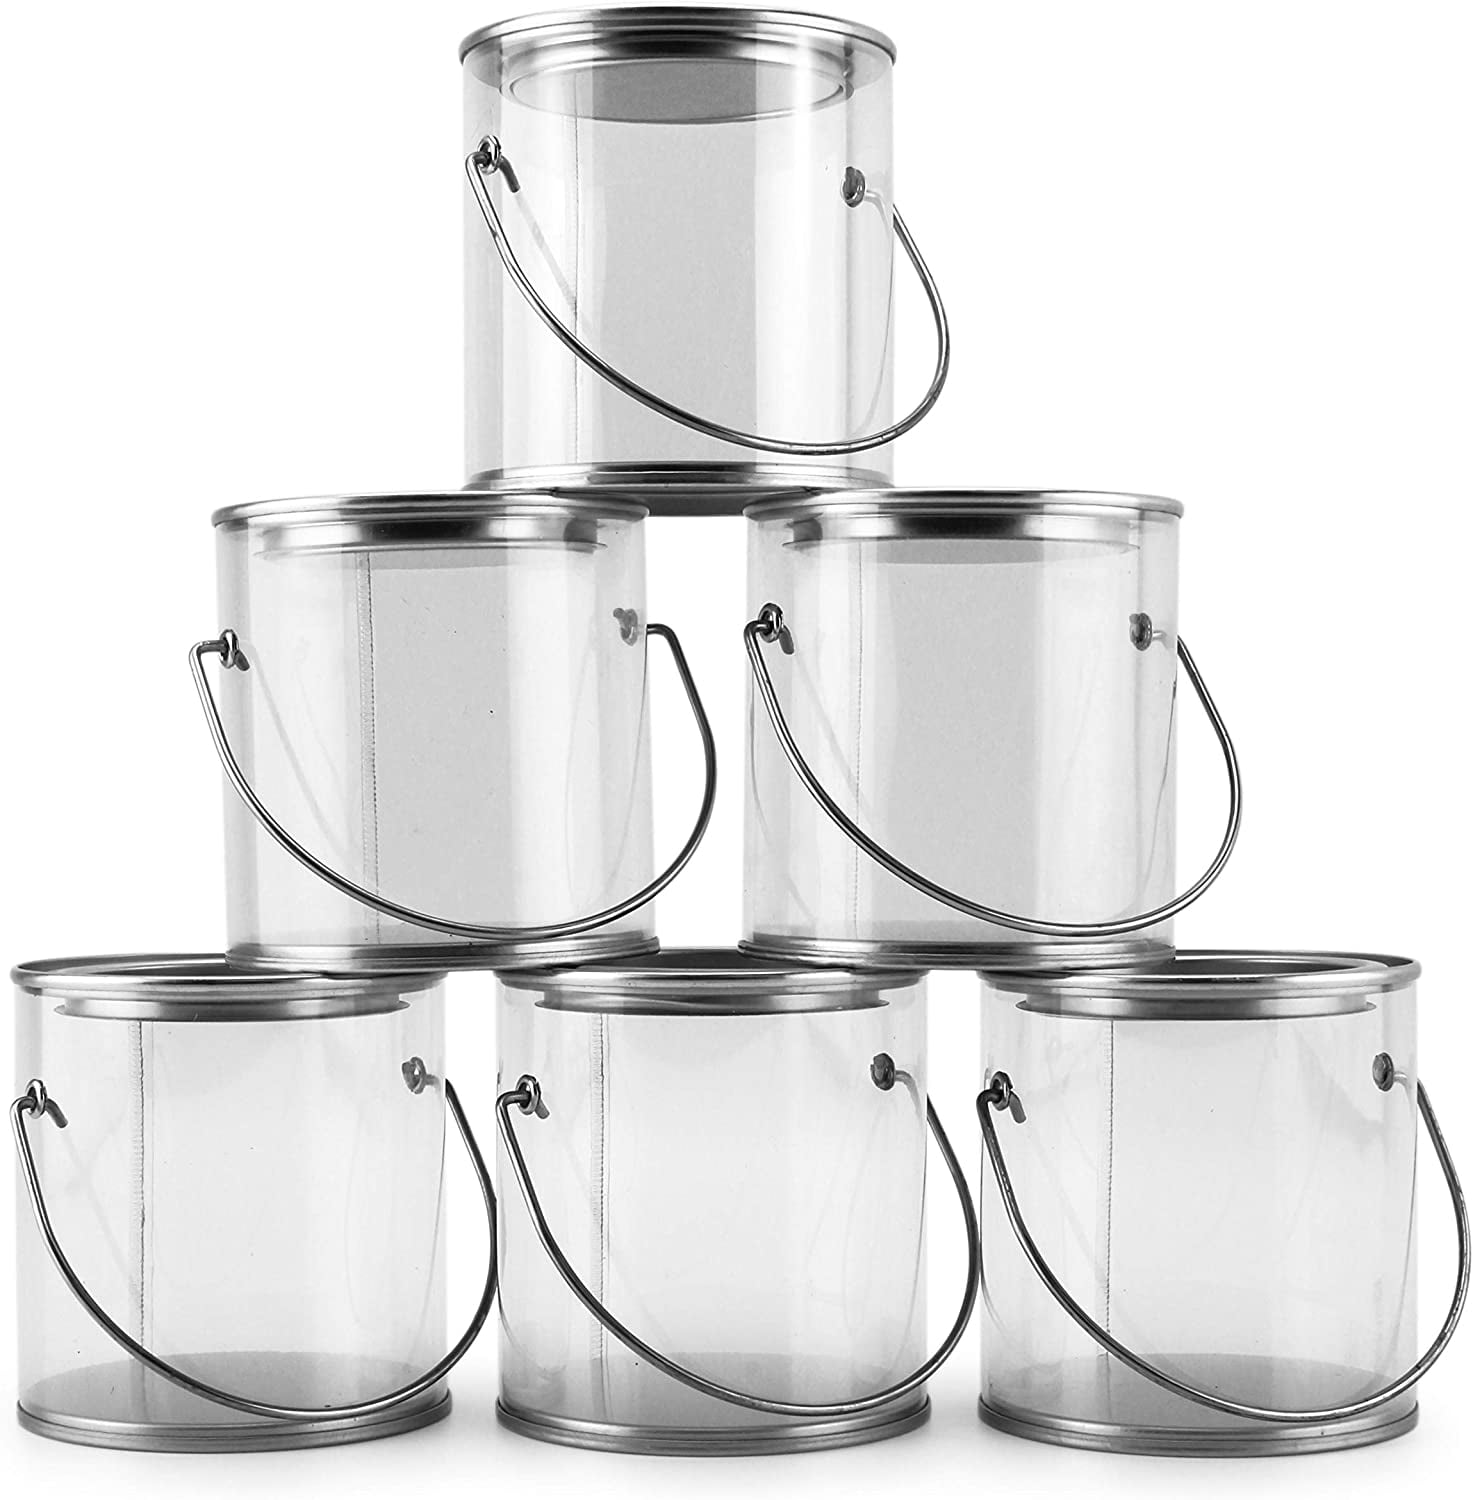 Set of 6x 1 Pint Empty Metal paint cans with lids Automotive Paint  Container